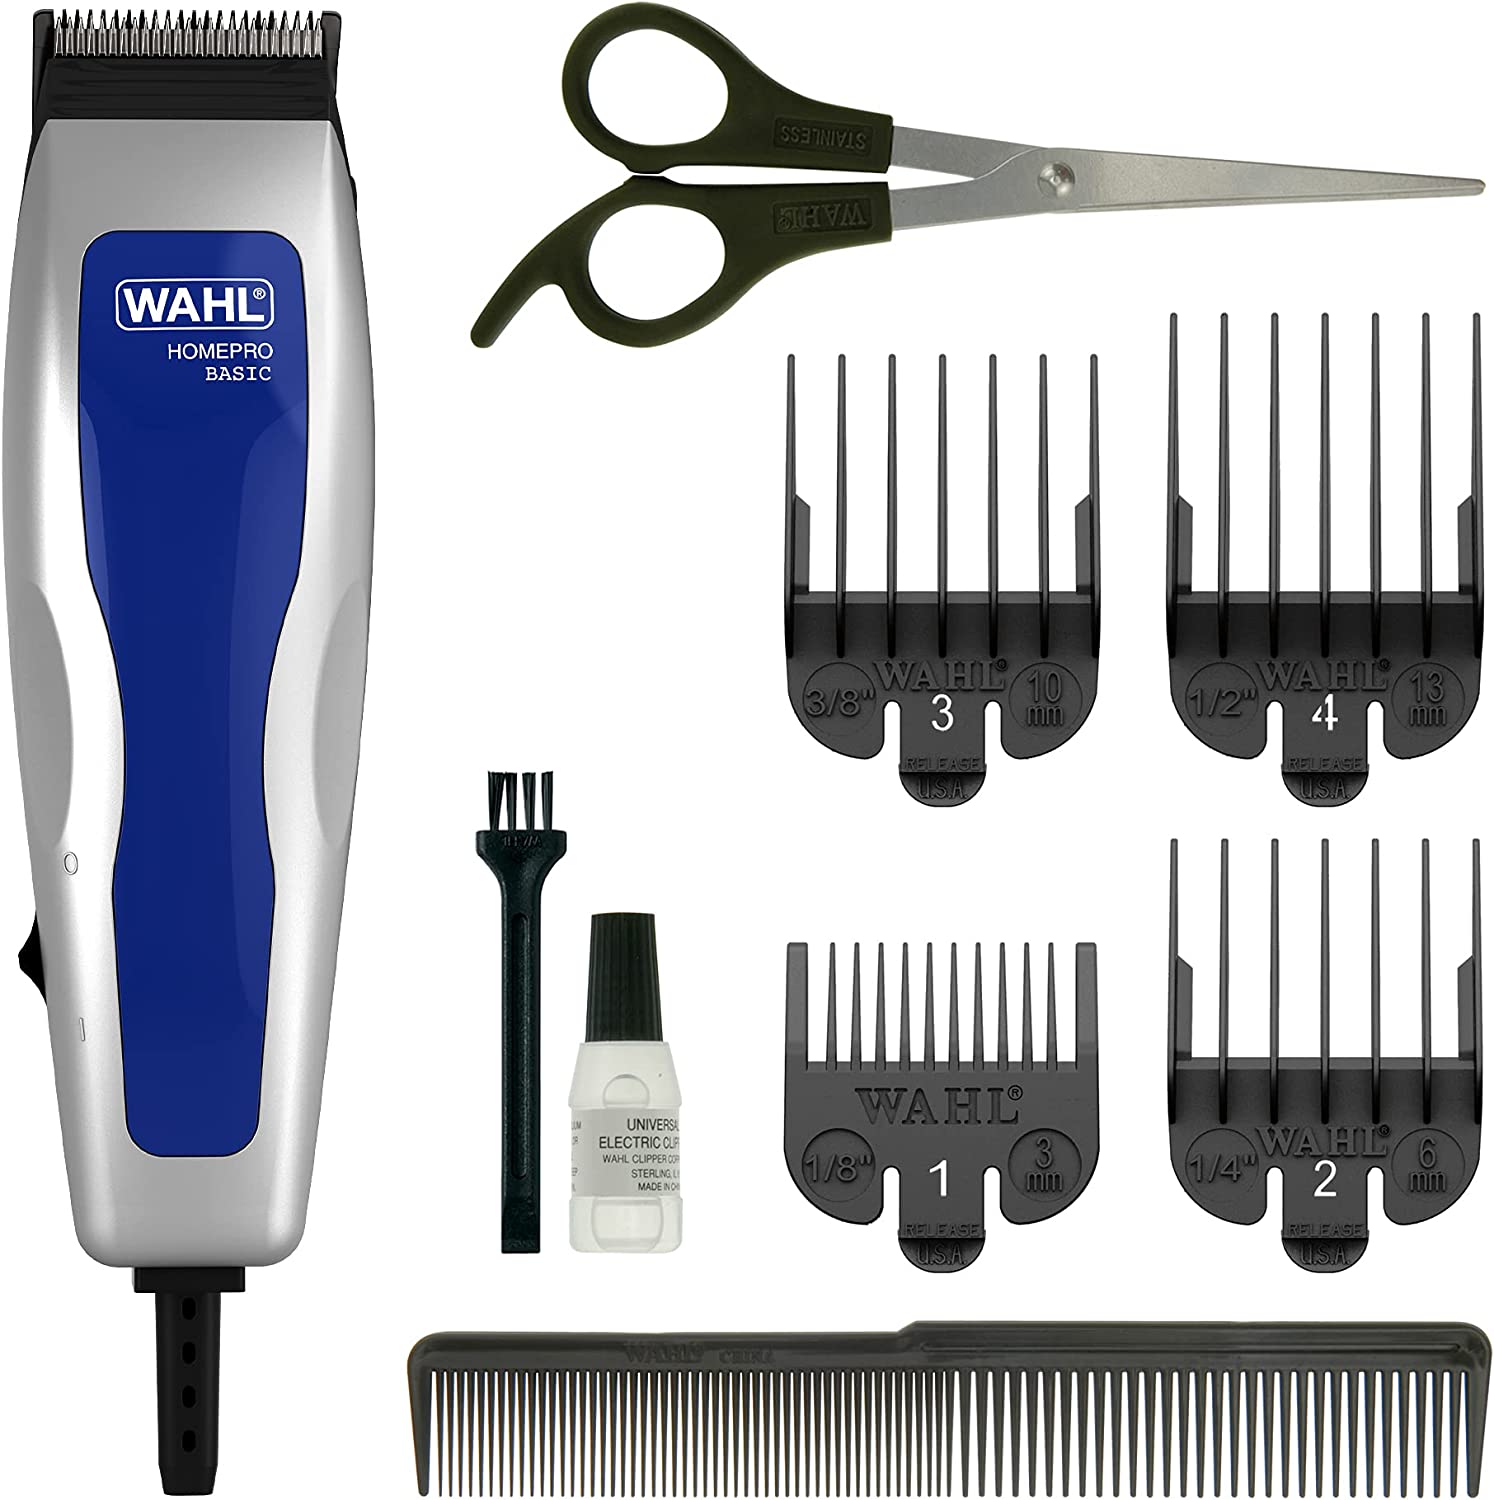 Wahl Homepro  9155-217 Corded Hair Clipper